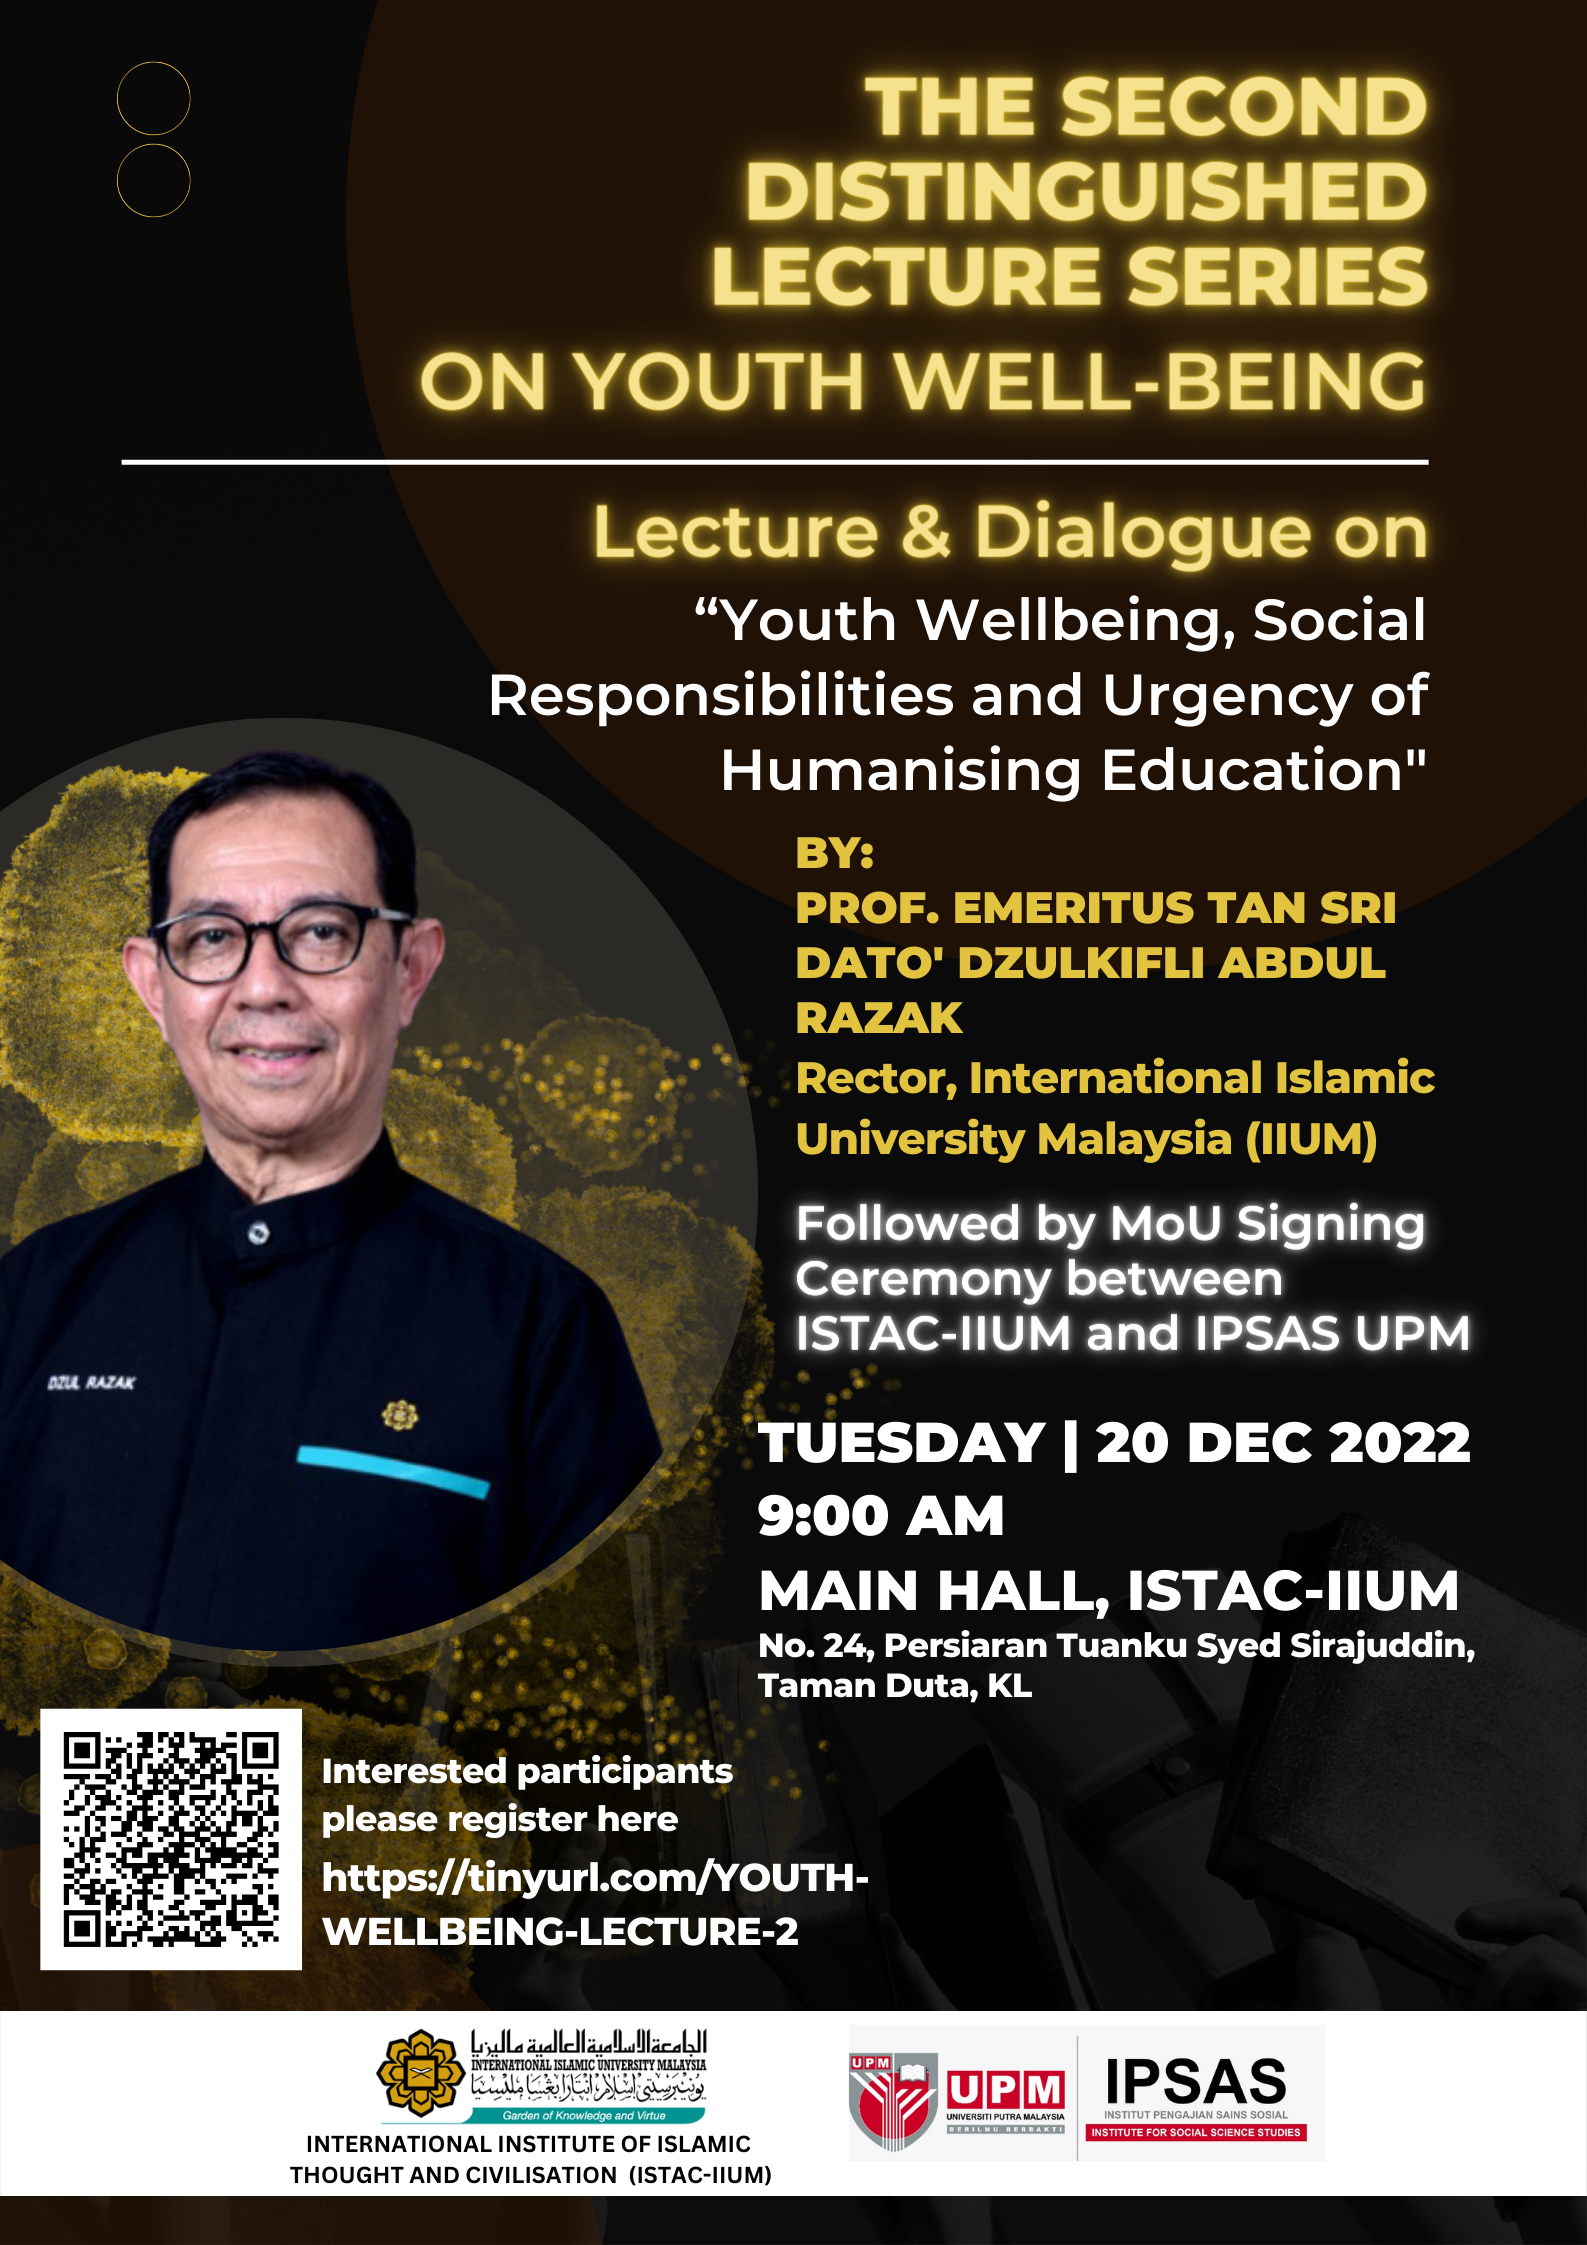 THE SECOND DISTINGUISHED LECTURE SERIES ON YOUTH WELL-BEING